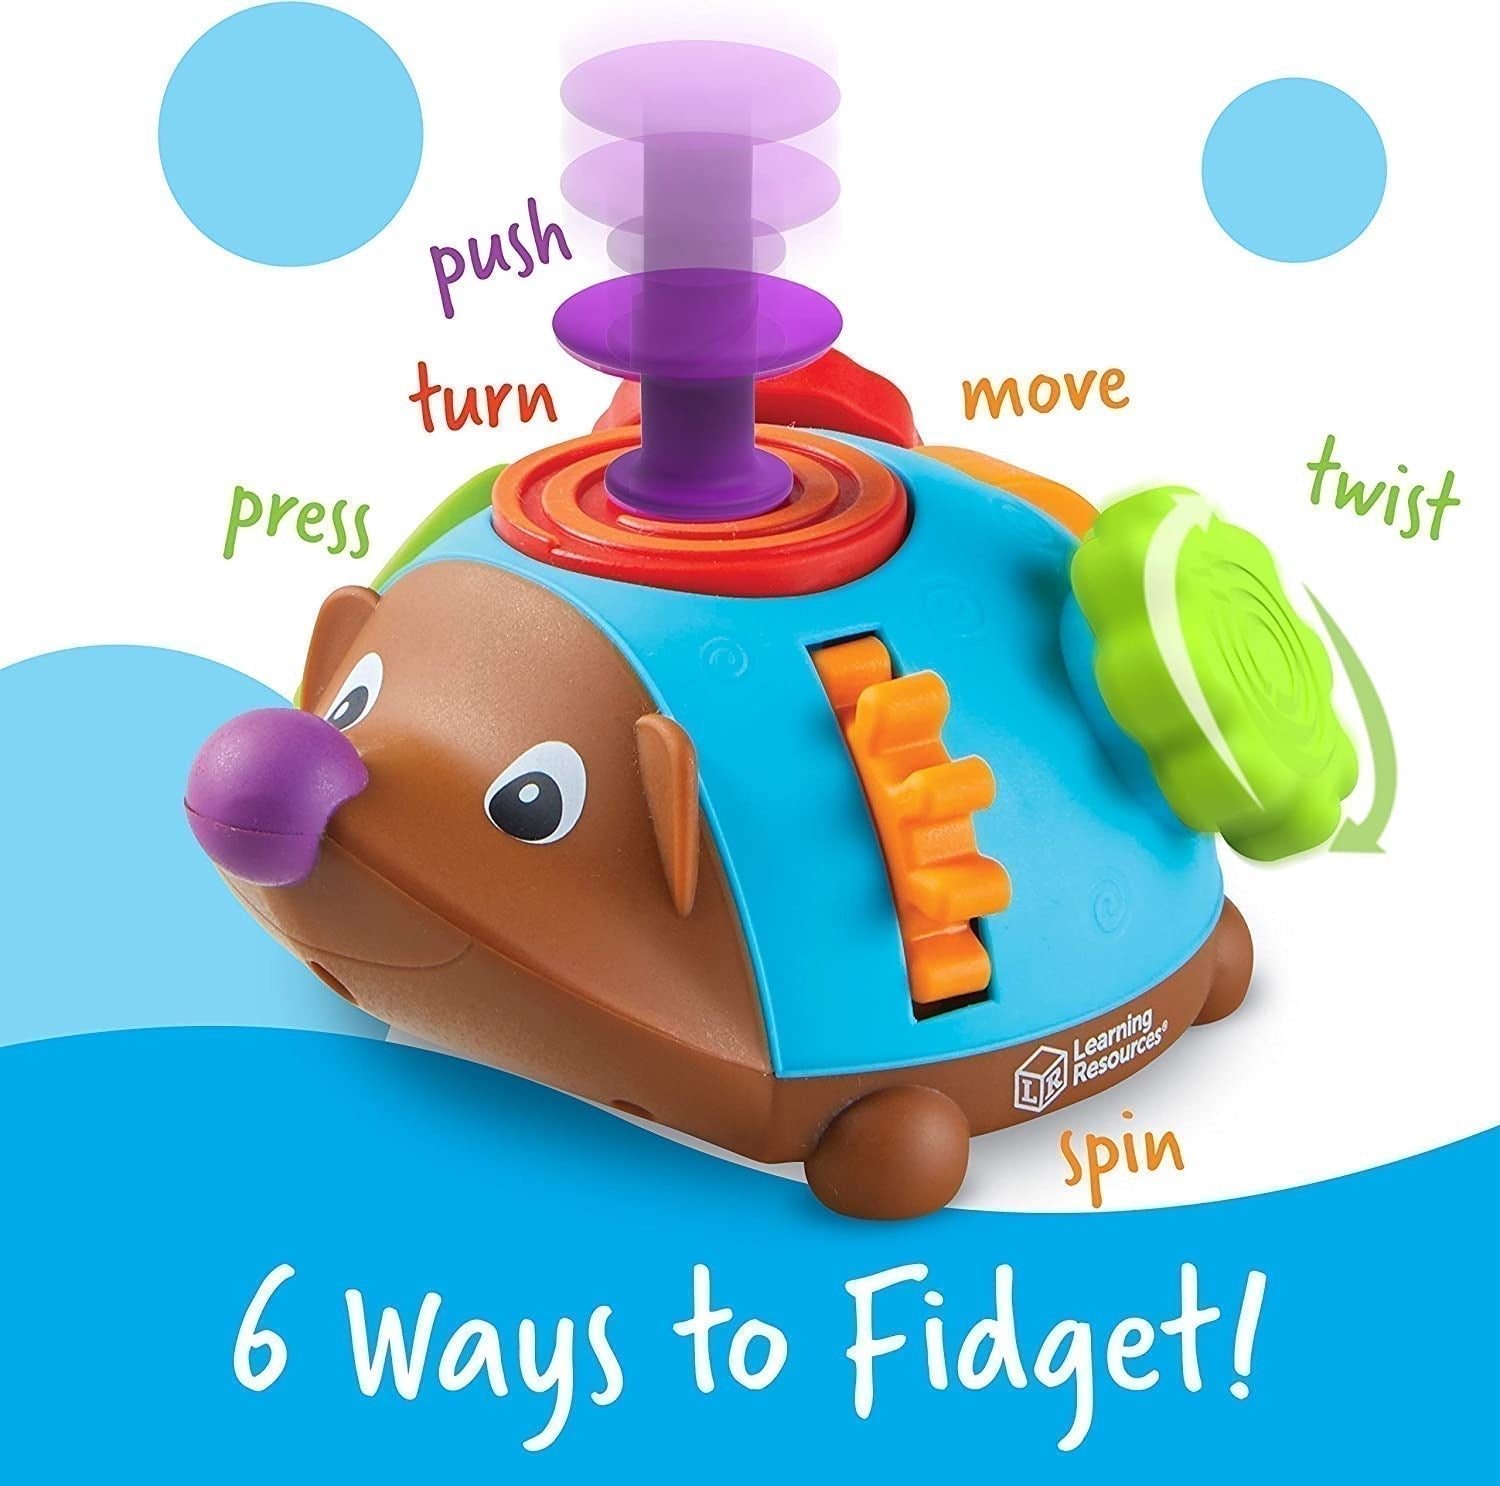 Spike the Fine Motor Hedgehog Fidget Friend, There are 6 ways to fidget and play with Spike the Fine Motor Hedgehog® Fidget Friend. Each time your child spins the wheel, turns the crank, presses the button, twists the knob, pushes the plunger, and moves the switch, they’re learning essential fine motor skills through tactile and fun fidget play. Young children will build new preschool sensory skills every time they fidget with the Spike the Fine Motor Hedgehog Fidget Friend. Inspired by our bestselling Spik